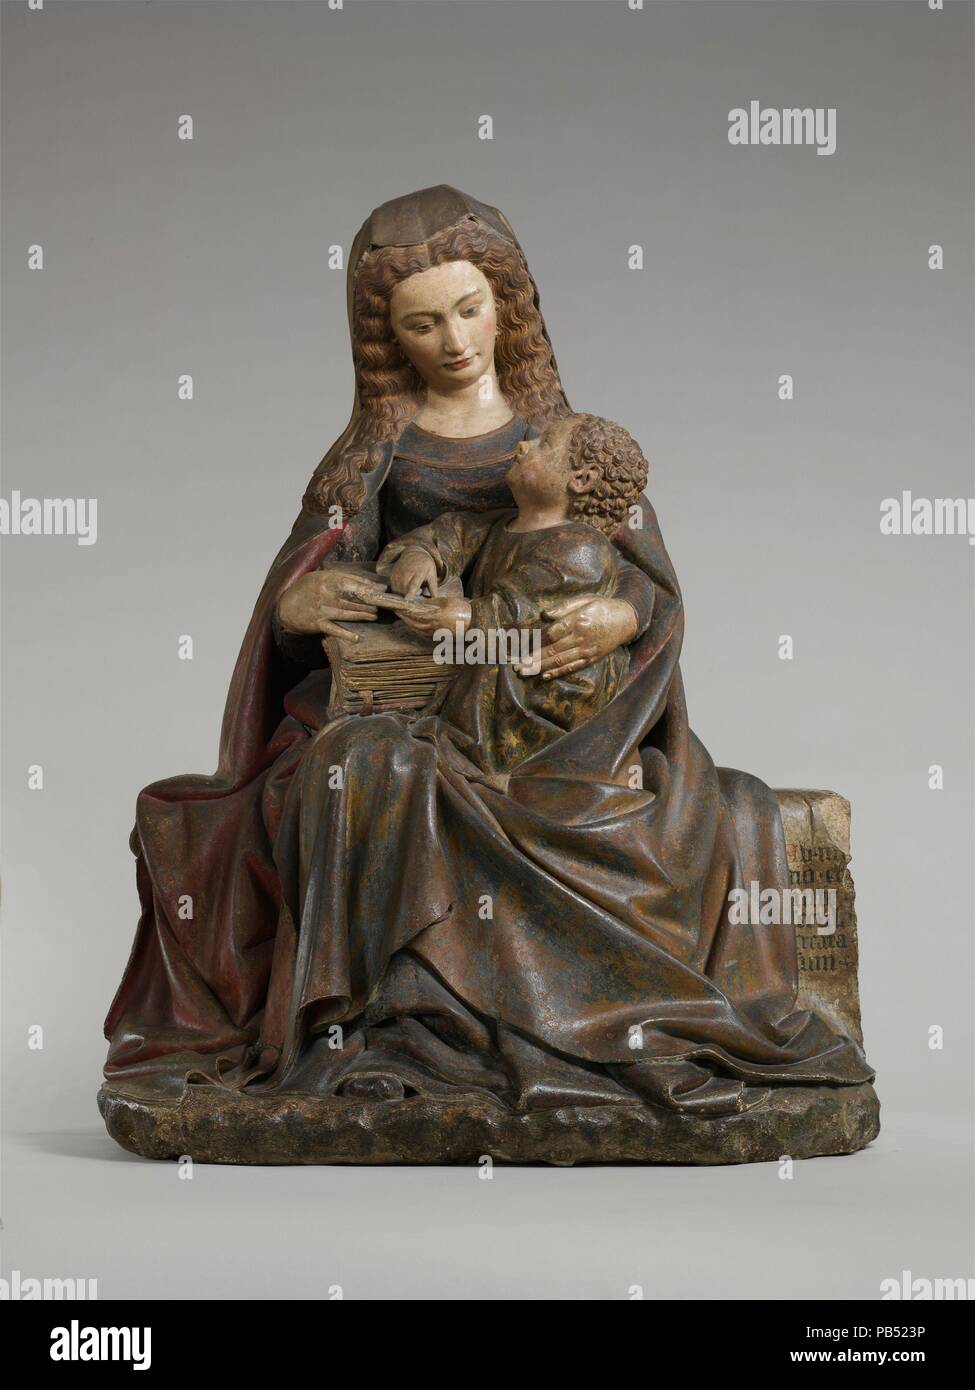 Virgin and Child. Artist: Attributed to Claus de Werve (Netherlandish, active in France, ca. 1380-1439, active Burgundy, 1396-ca. 1439). Culture: French. Dimensions: Overall: 53 3/8 x 41 1/8 x 27 in. (135.5 x 104.5 x 68.6 cm). Date: ca. 1415-17.  This monumental yet intimate image of the Virgin and Child was probably a gift of John the Fearless, Duke of Burgundy (d. 1419), or his wife, Margaret of Bavaria (d. 1424), to the convent they founded dedicated to the Franciscan order of Poor Clares at Poligny. As court sculptor to the Burgundian dukes in Dijon, the influential artist Claus de Werve,  Stock Photo